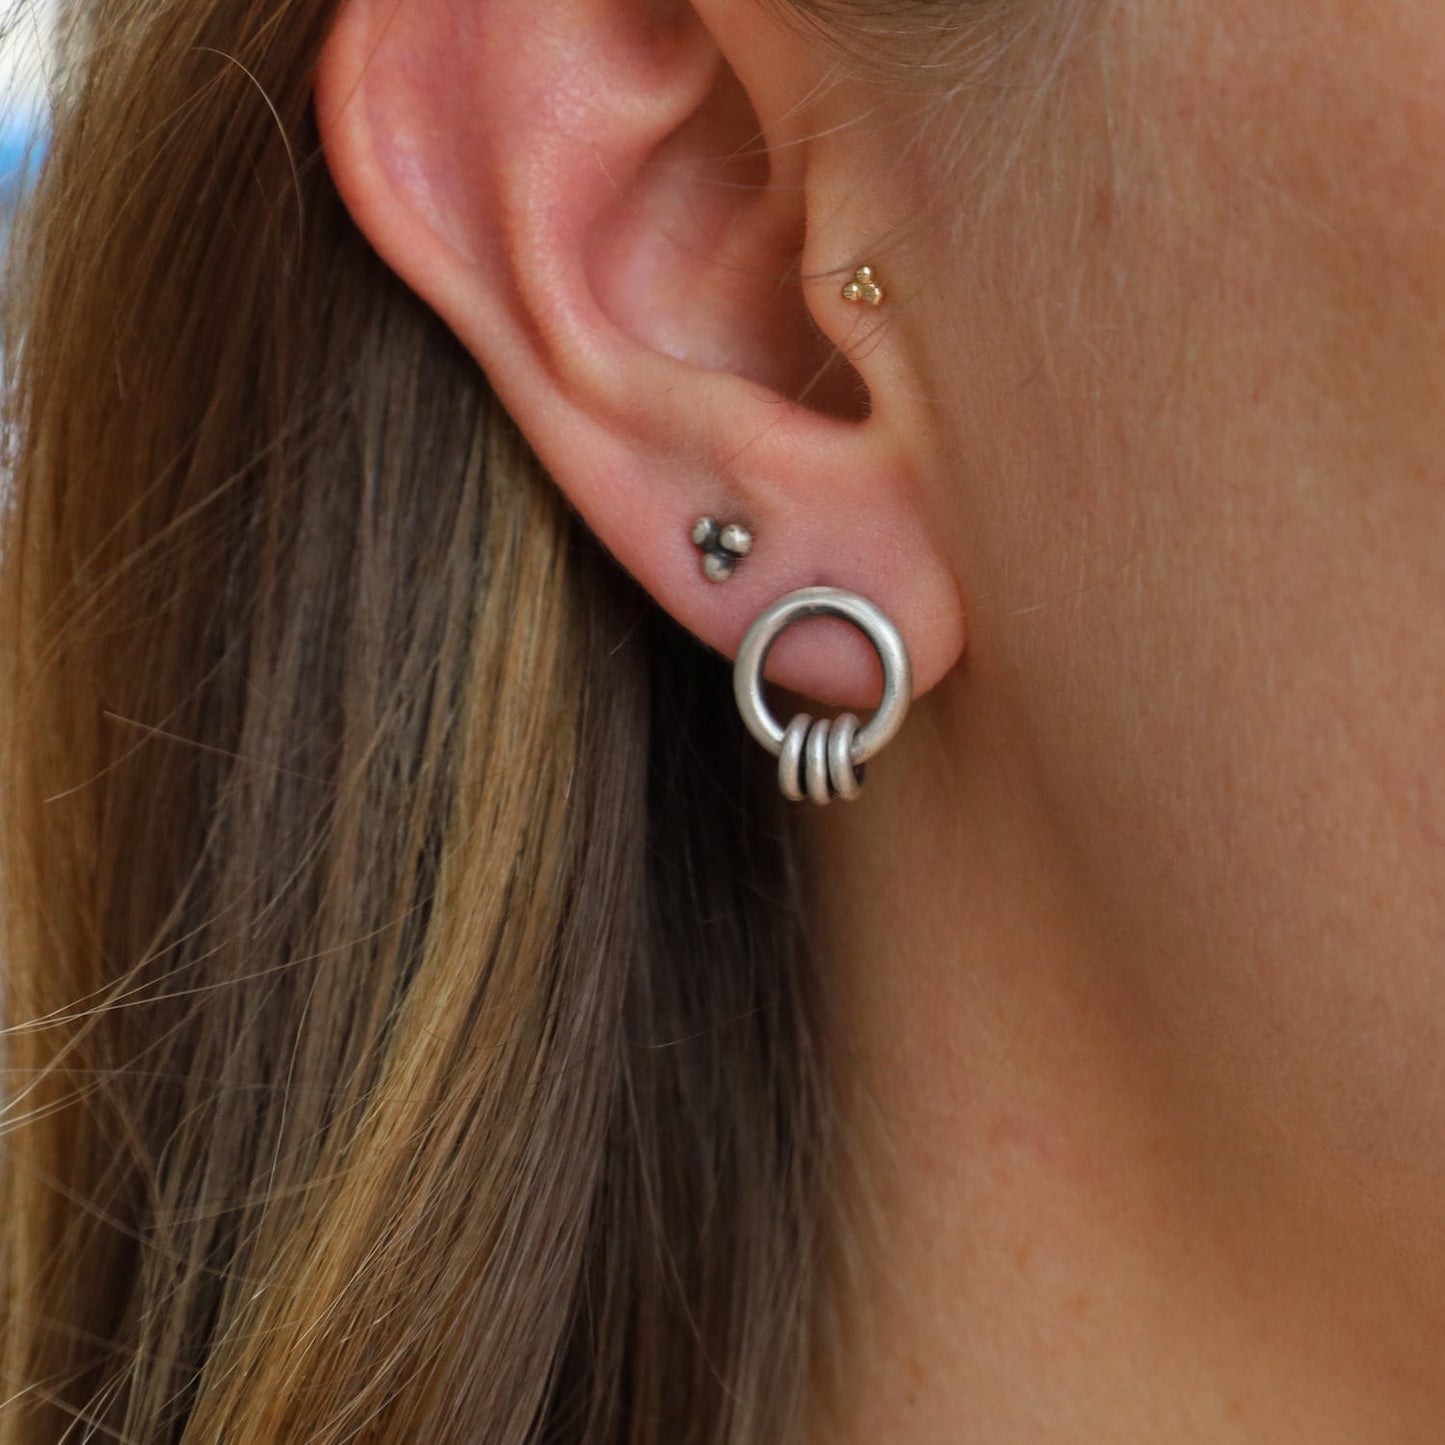 EAR Ring Stud with Three Floating Rings - Sterling Silver